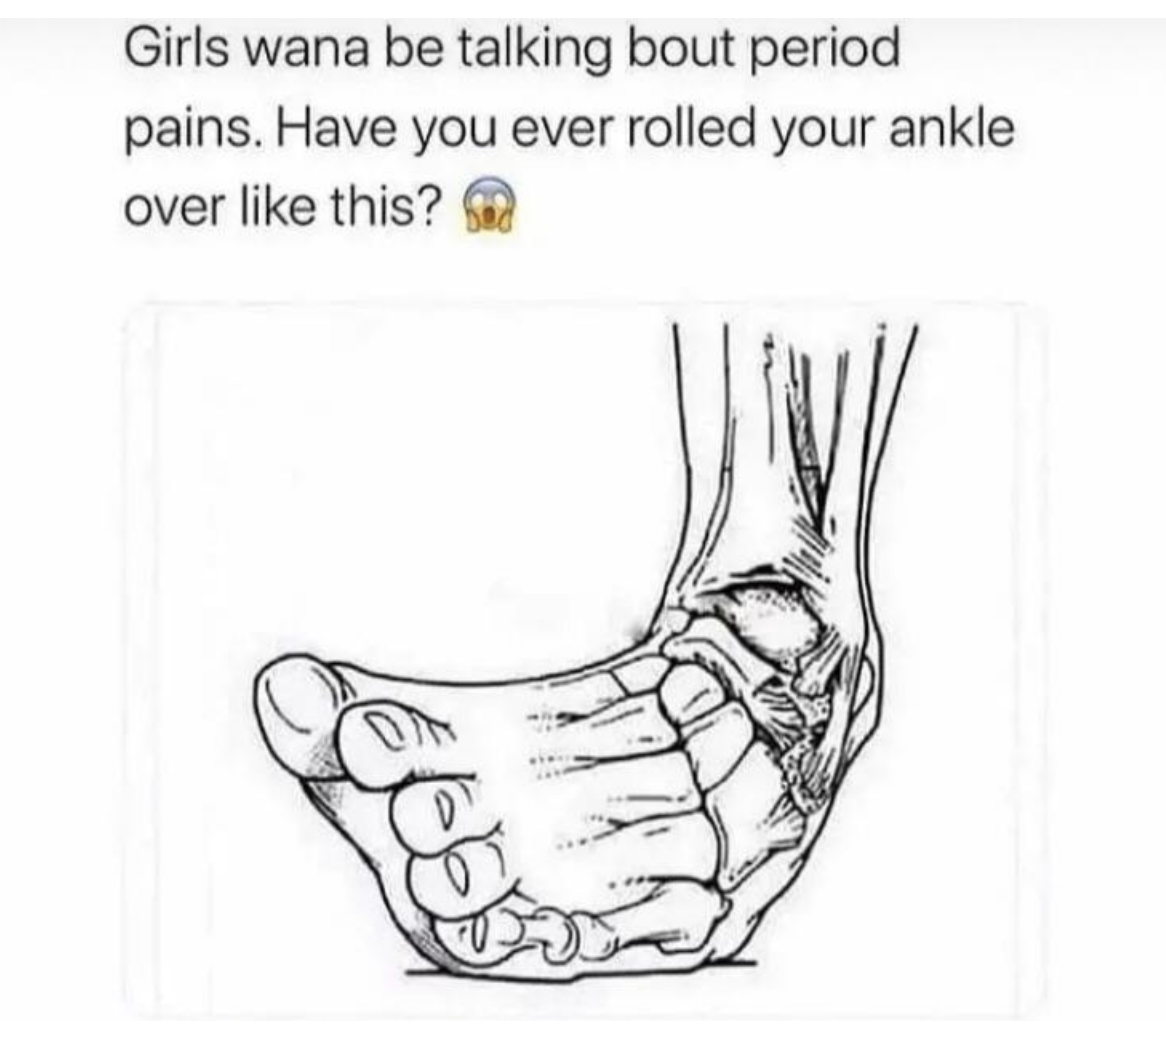 &quot;Girls wanna be talking about period pains; have you ever rolled your ankle over like this?&quot; above an illustration of a foot at an angle, with the left heel on the floor